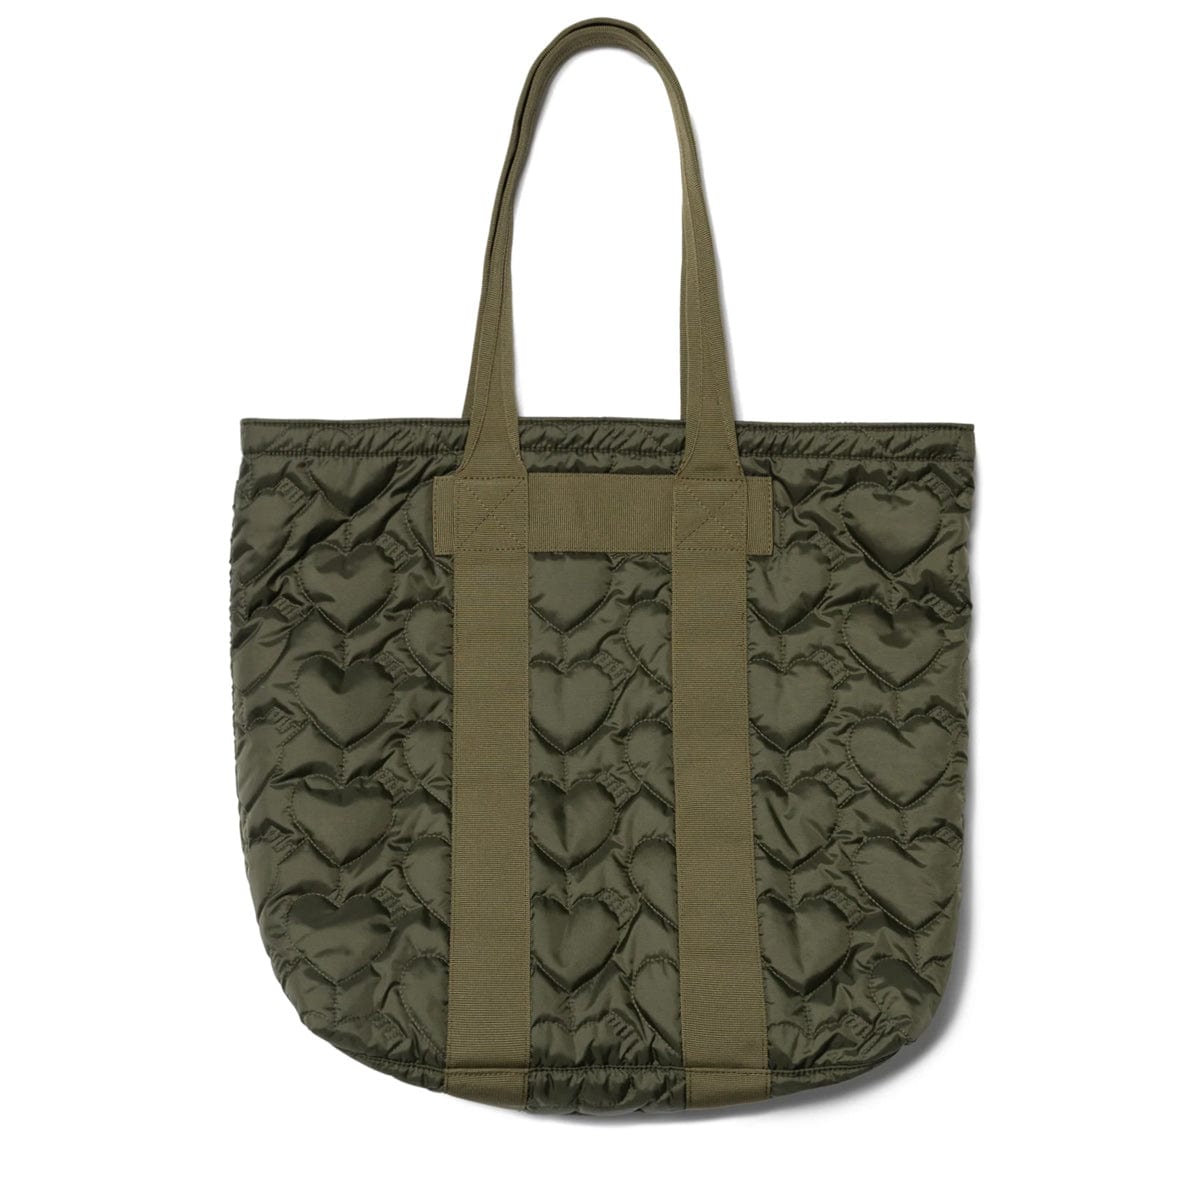 HUMAN MADE Bags OLIVE DRAB / O/S HEART QUILTING TOTE